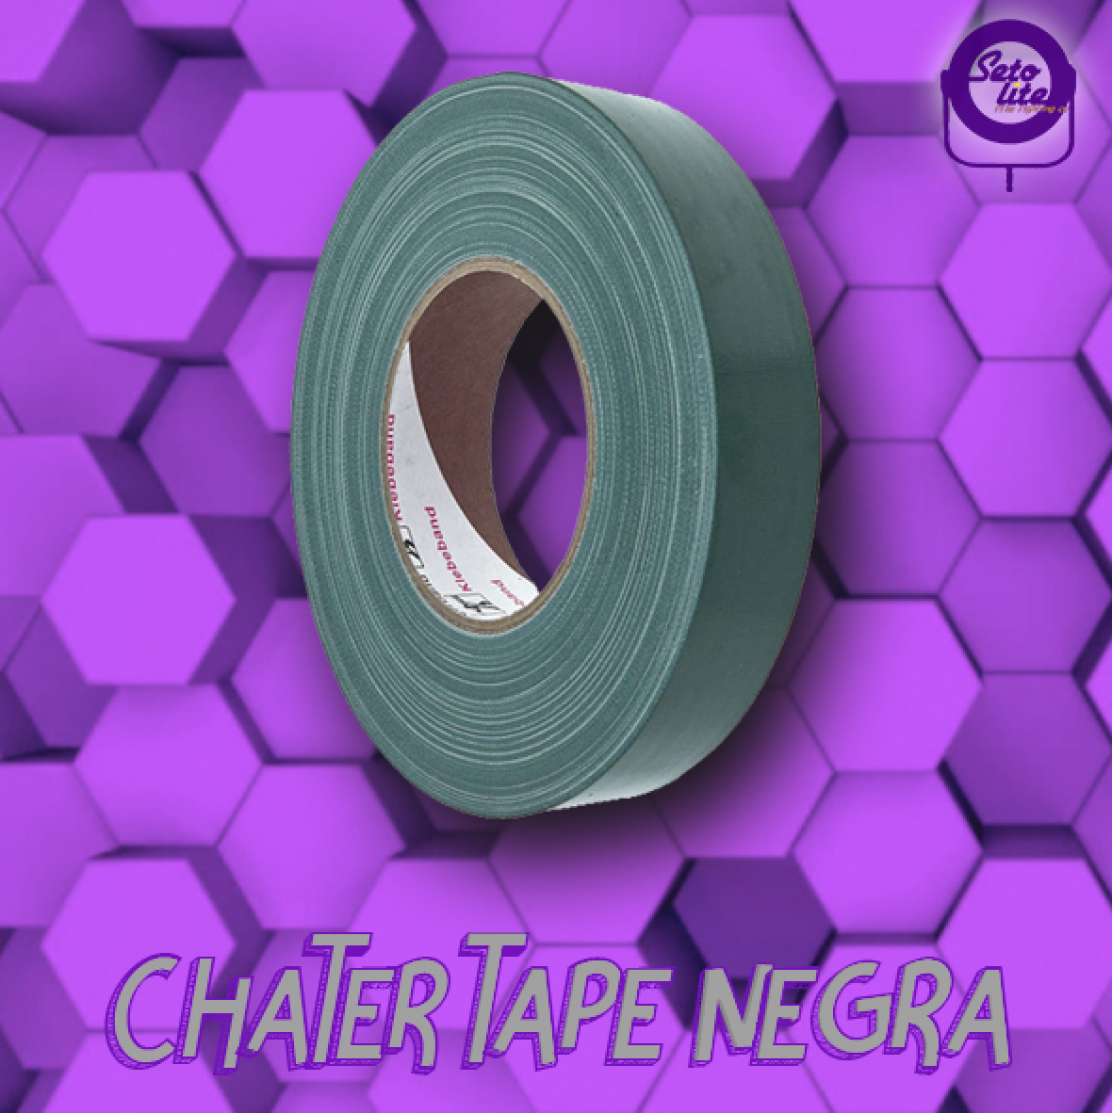 Chater tape negra